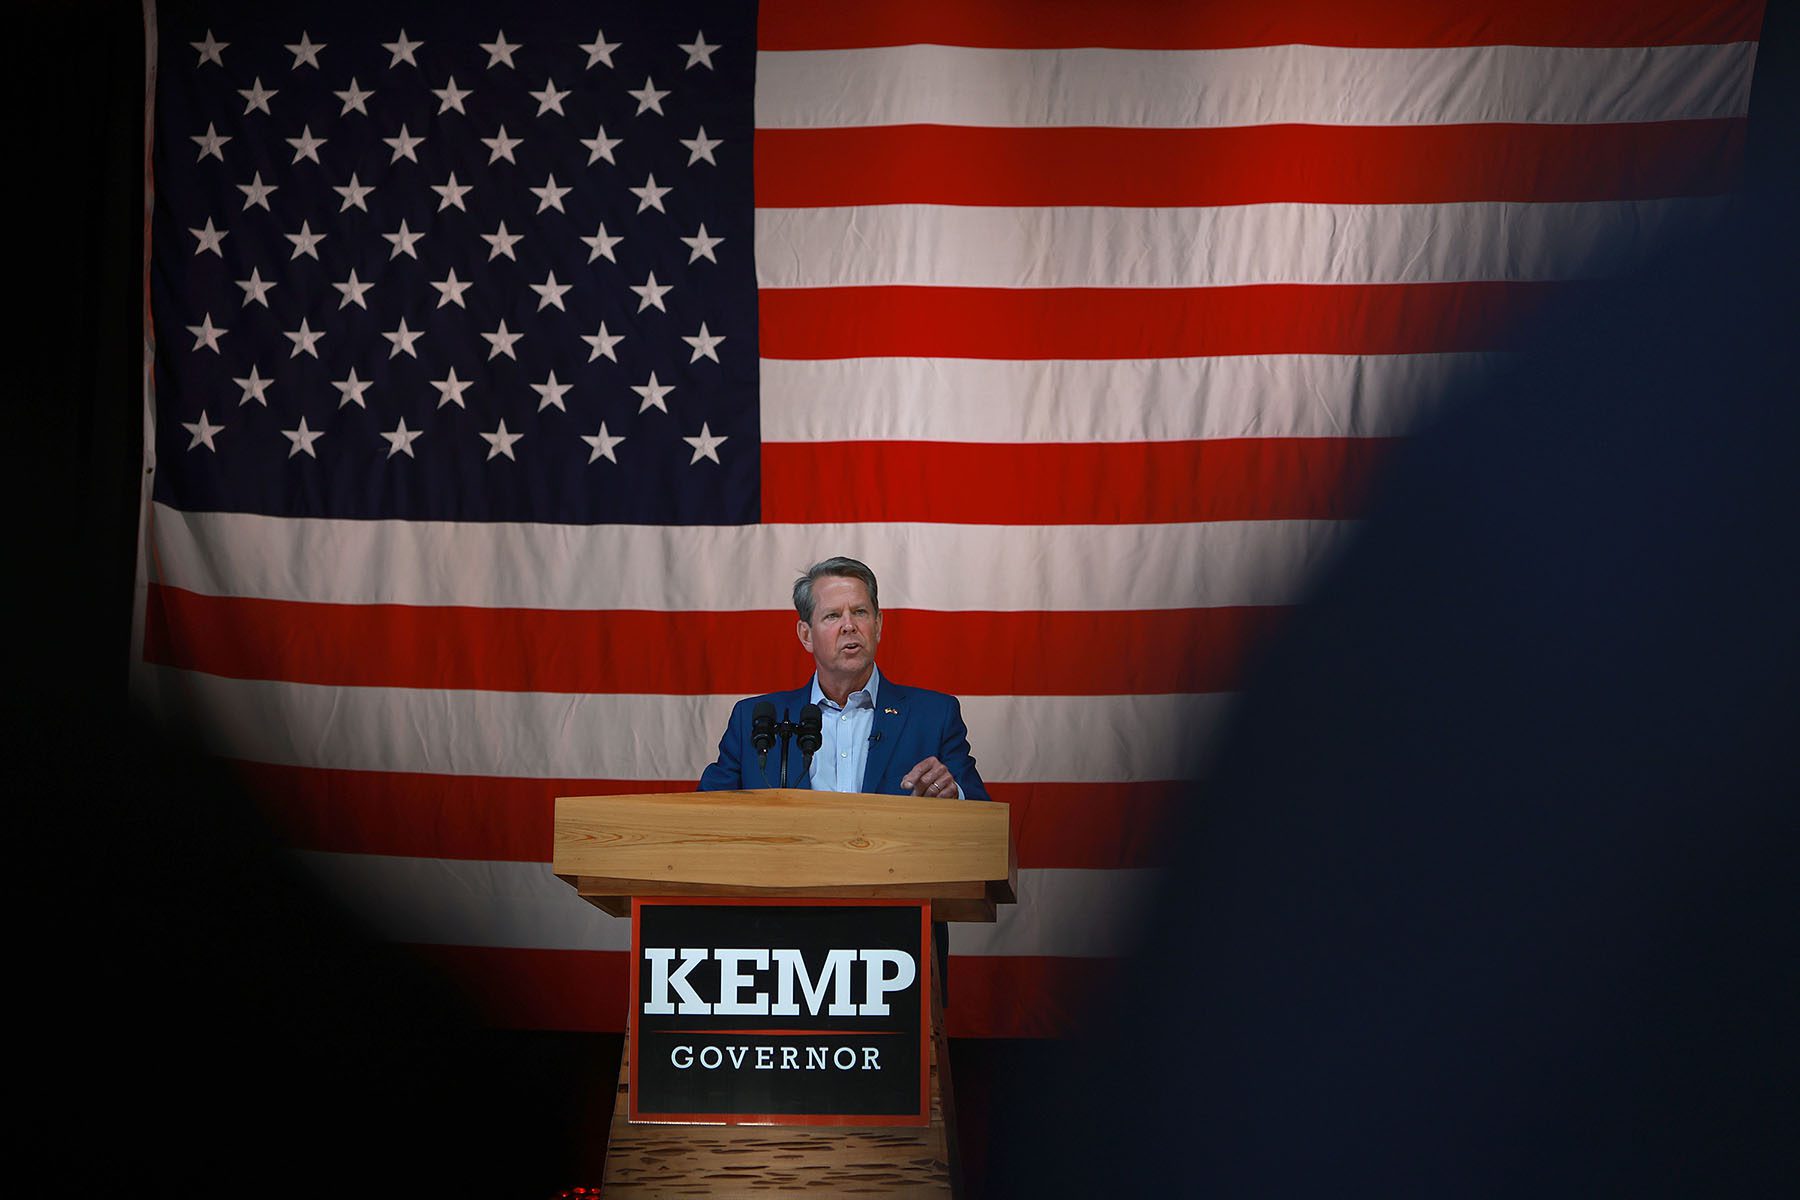 Brian Kemp speaks from a podium at a campaign event. The stage is adorned with a very large American Flag.